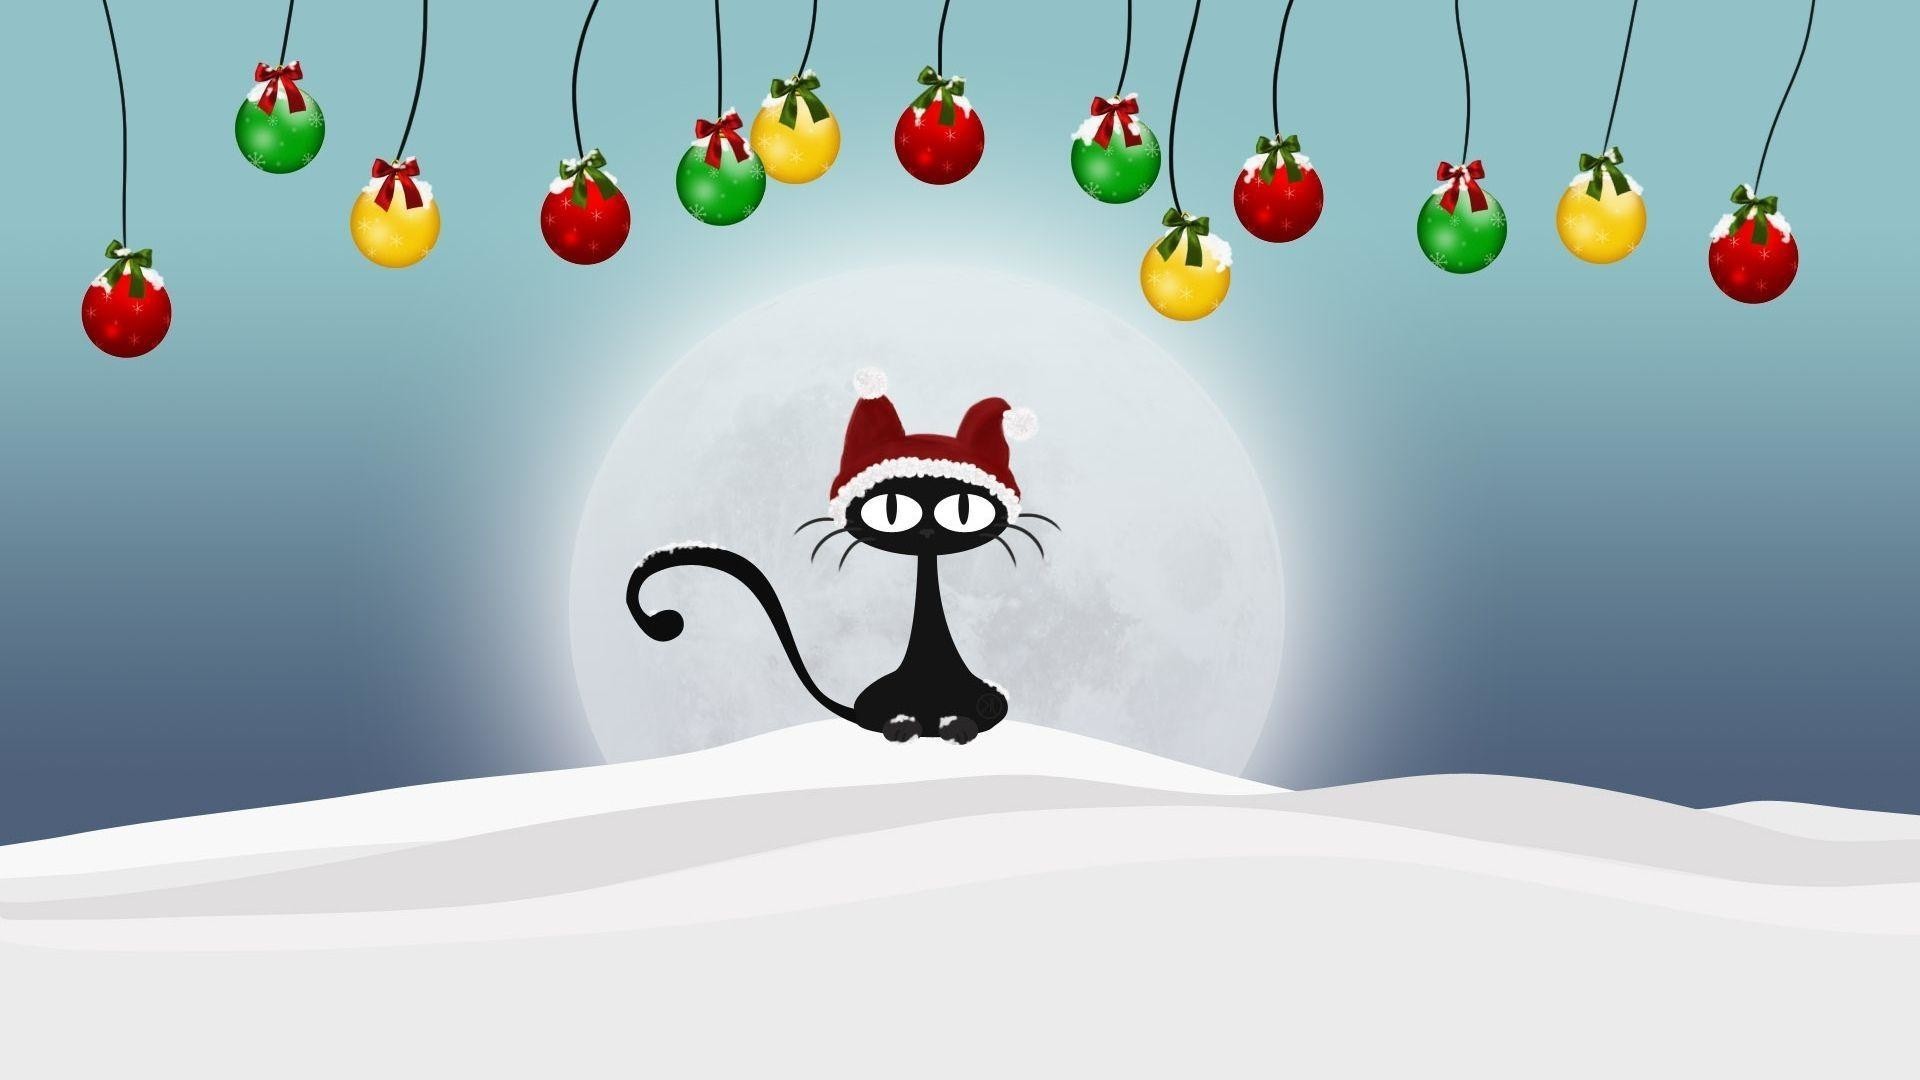 1920x1080  Funny Christmas Hd Background Wallpaper 31 HD Wallpapers .